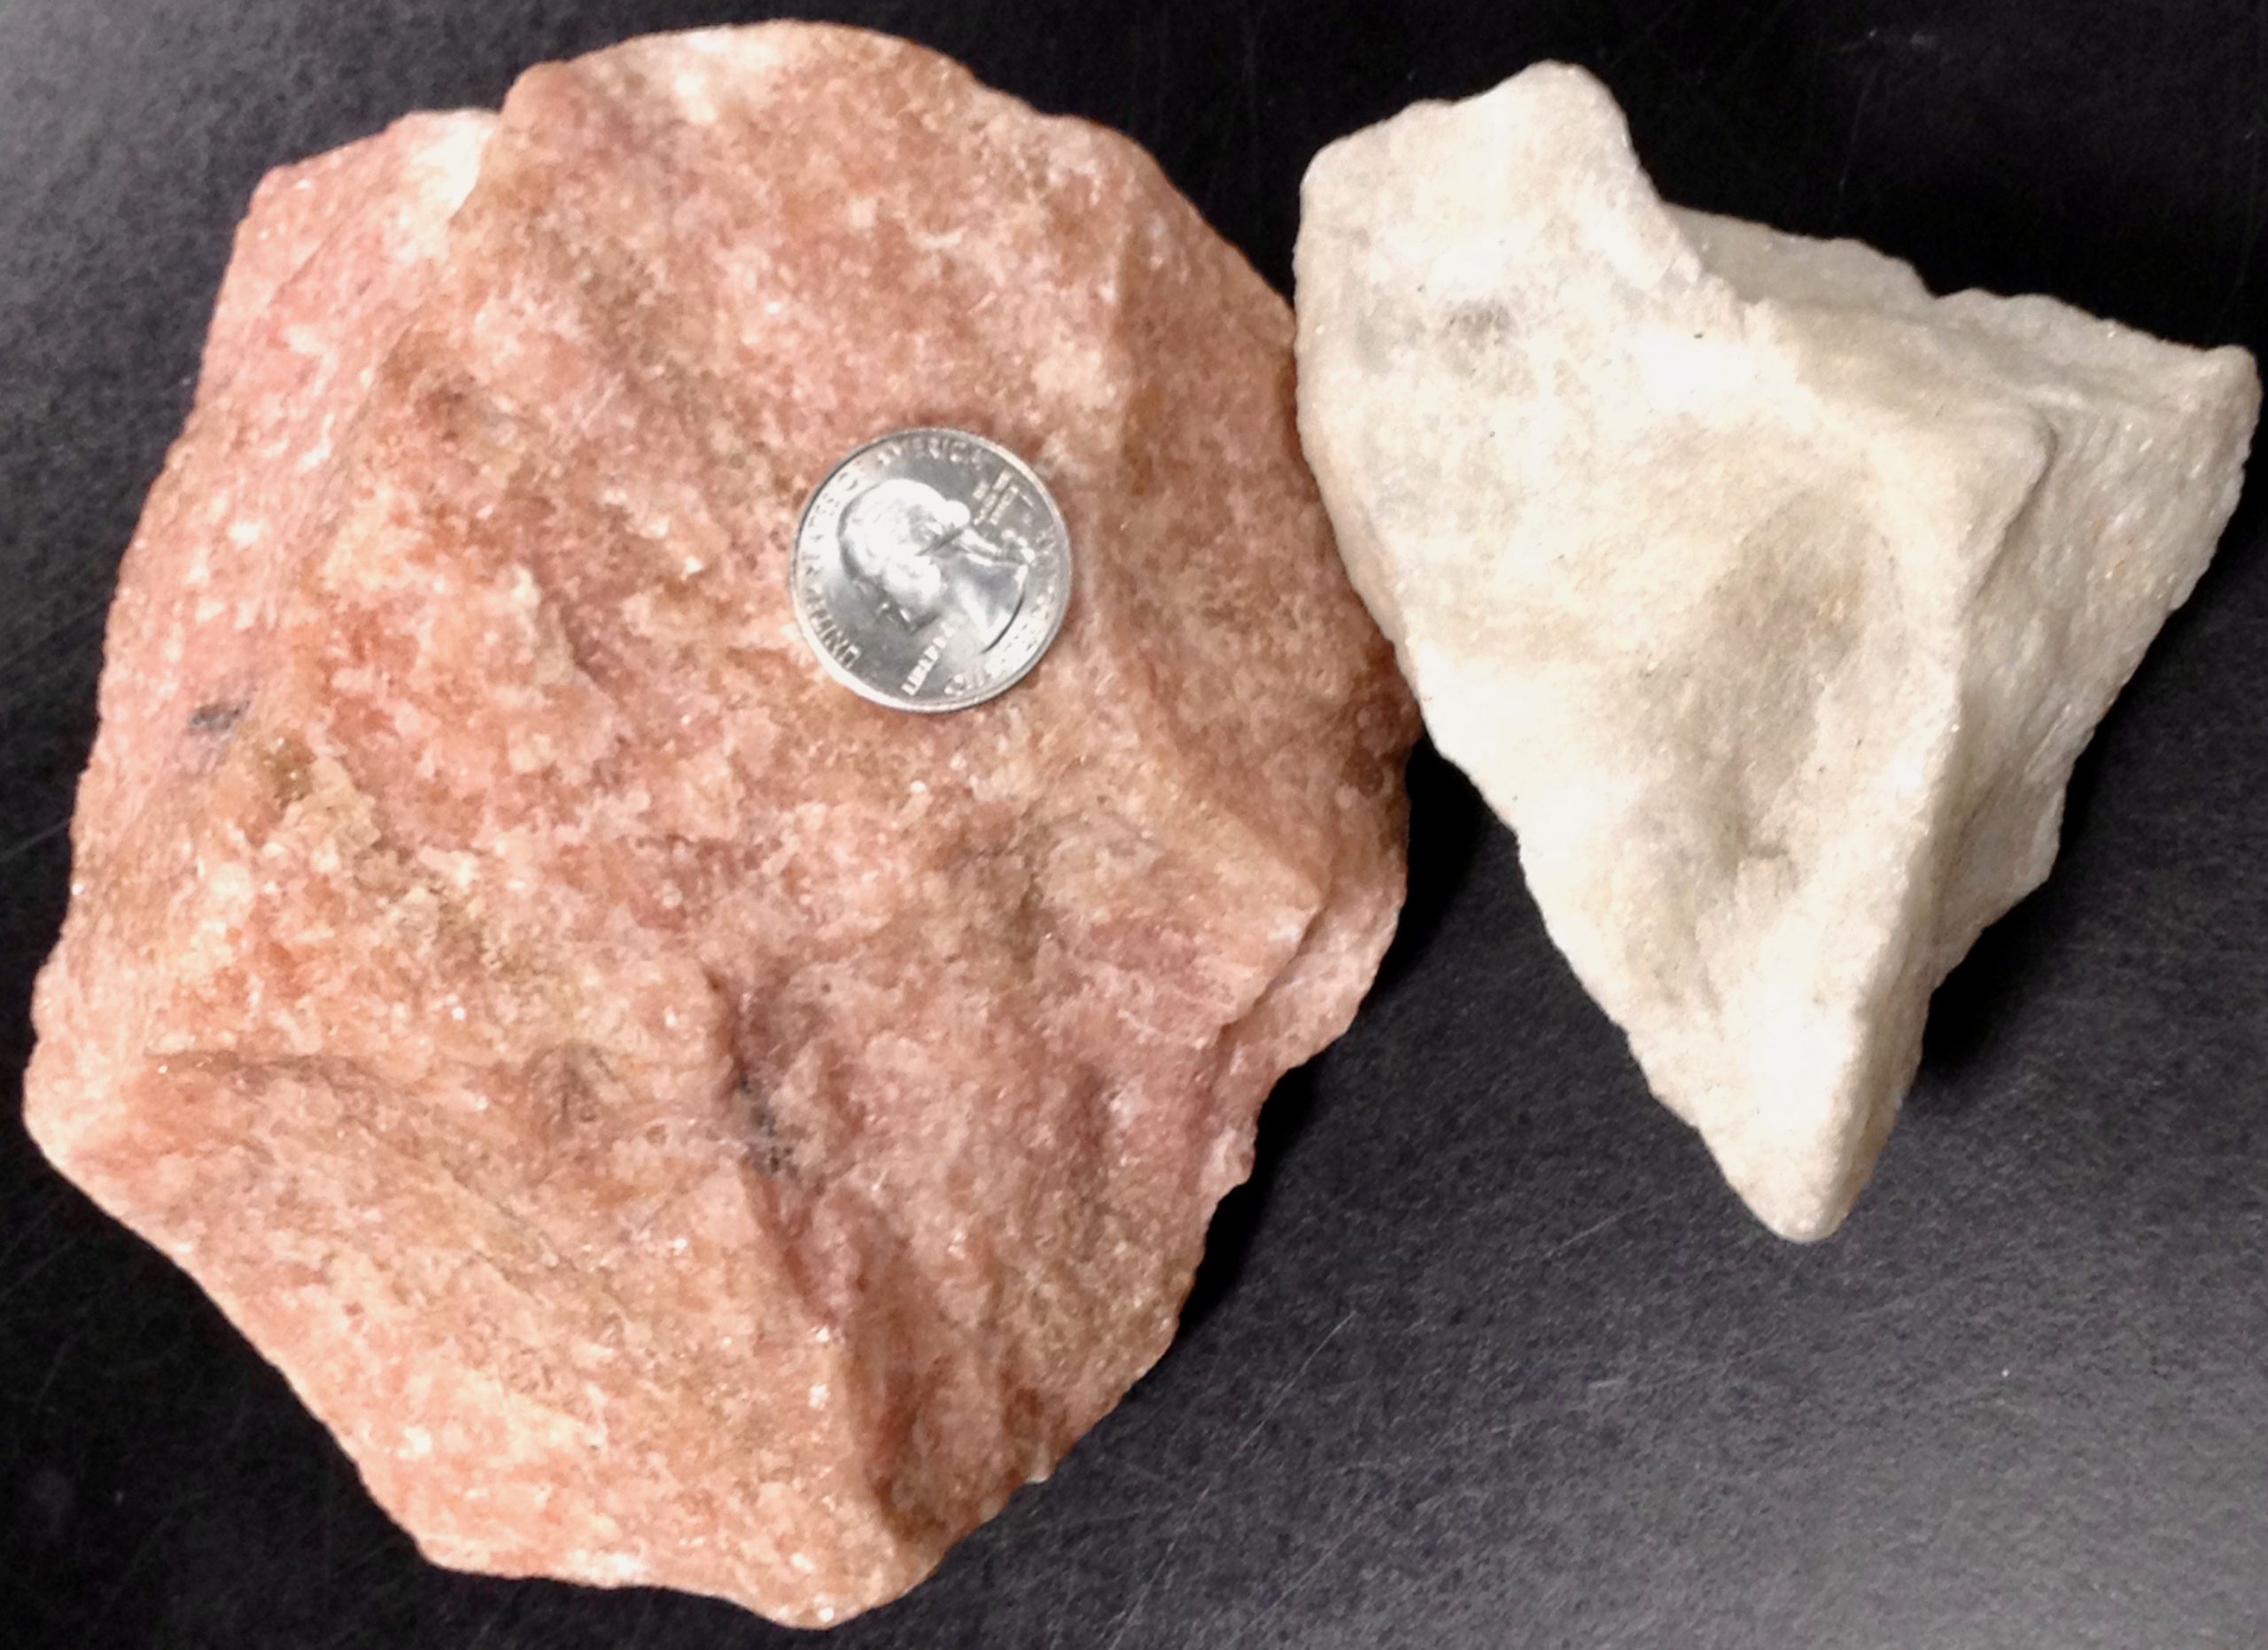 Two chunks of rock, one pink in color and the other white in color; both have interlocking crystals; a US quarter rests on the pink sample for scale.